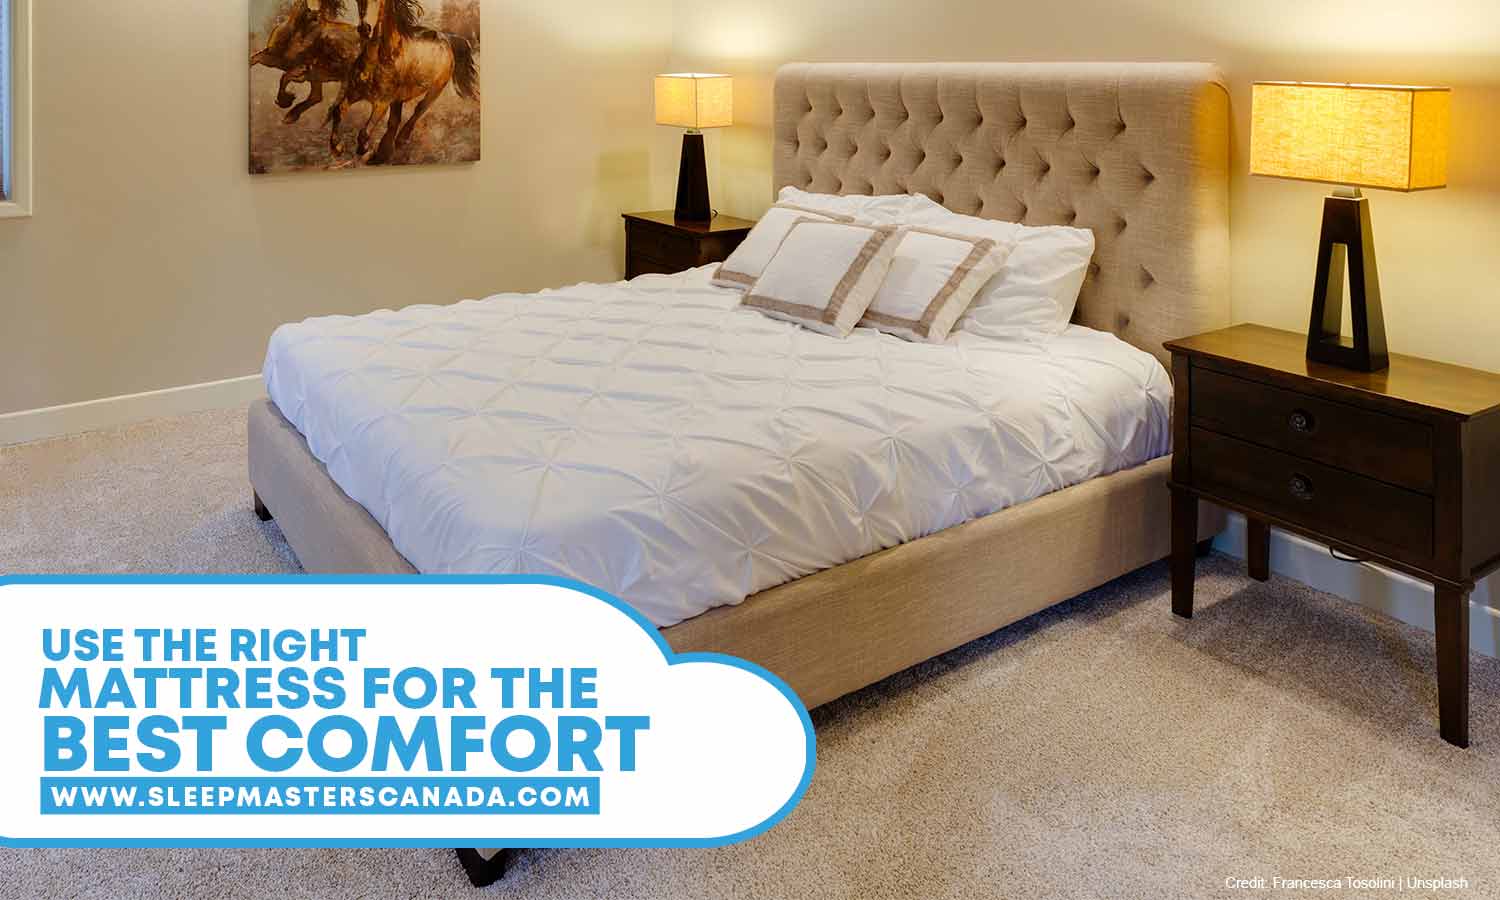 Use the right mattress for the best comfort